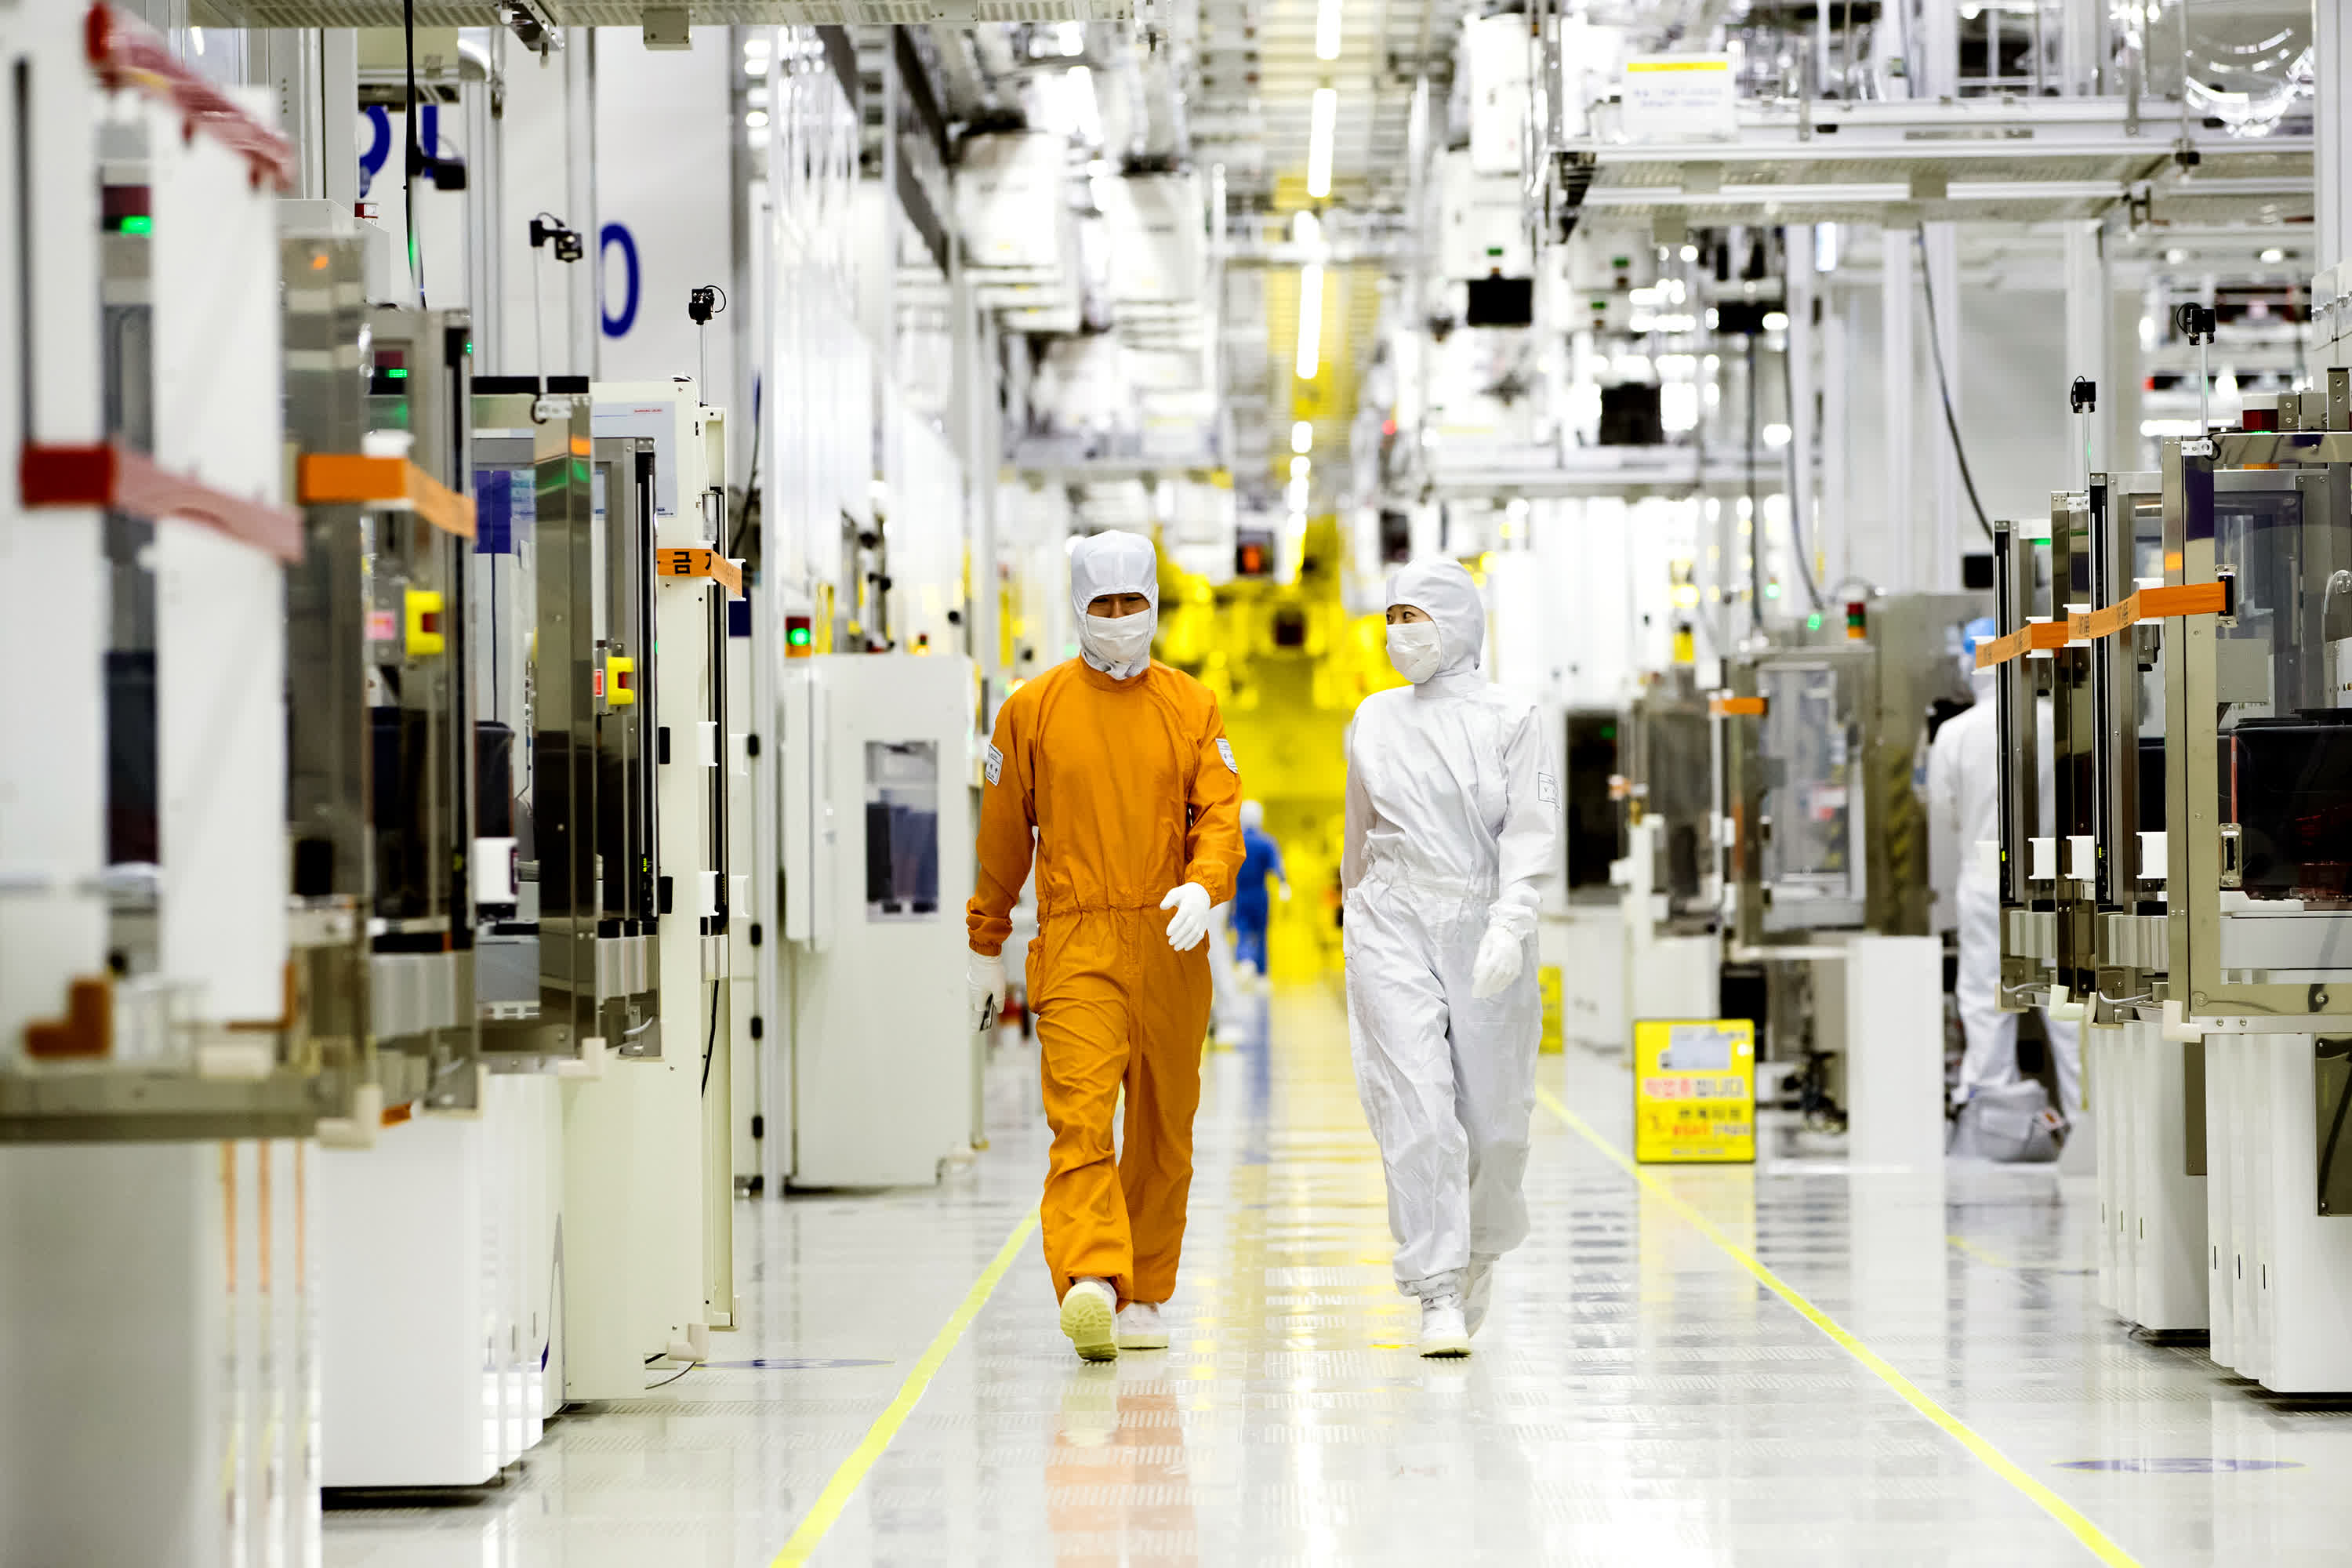 Low yield on Samsung's 4nm process node prompts Qualcomm to go with TSMC for future chips